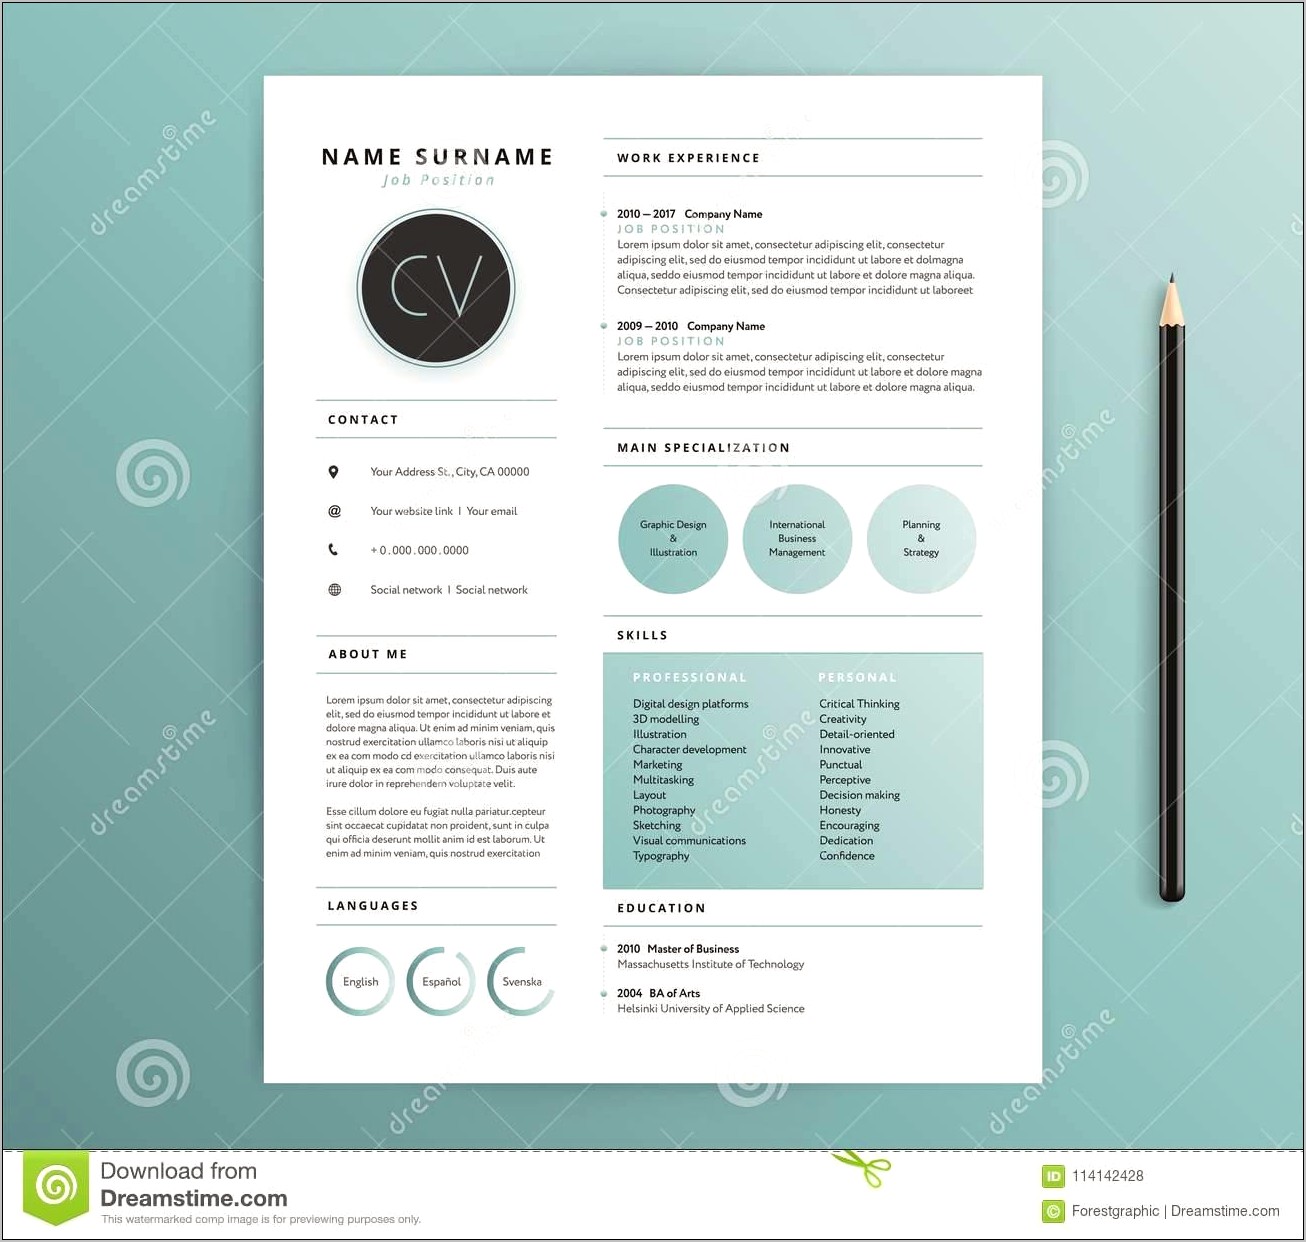 Resume Templates Designing And 3d Modeling